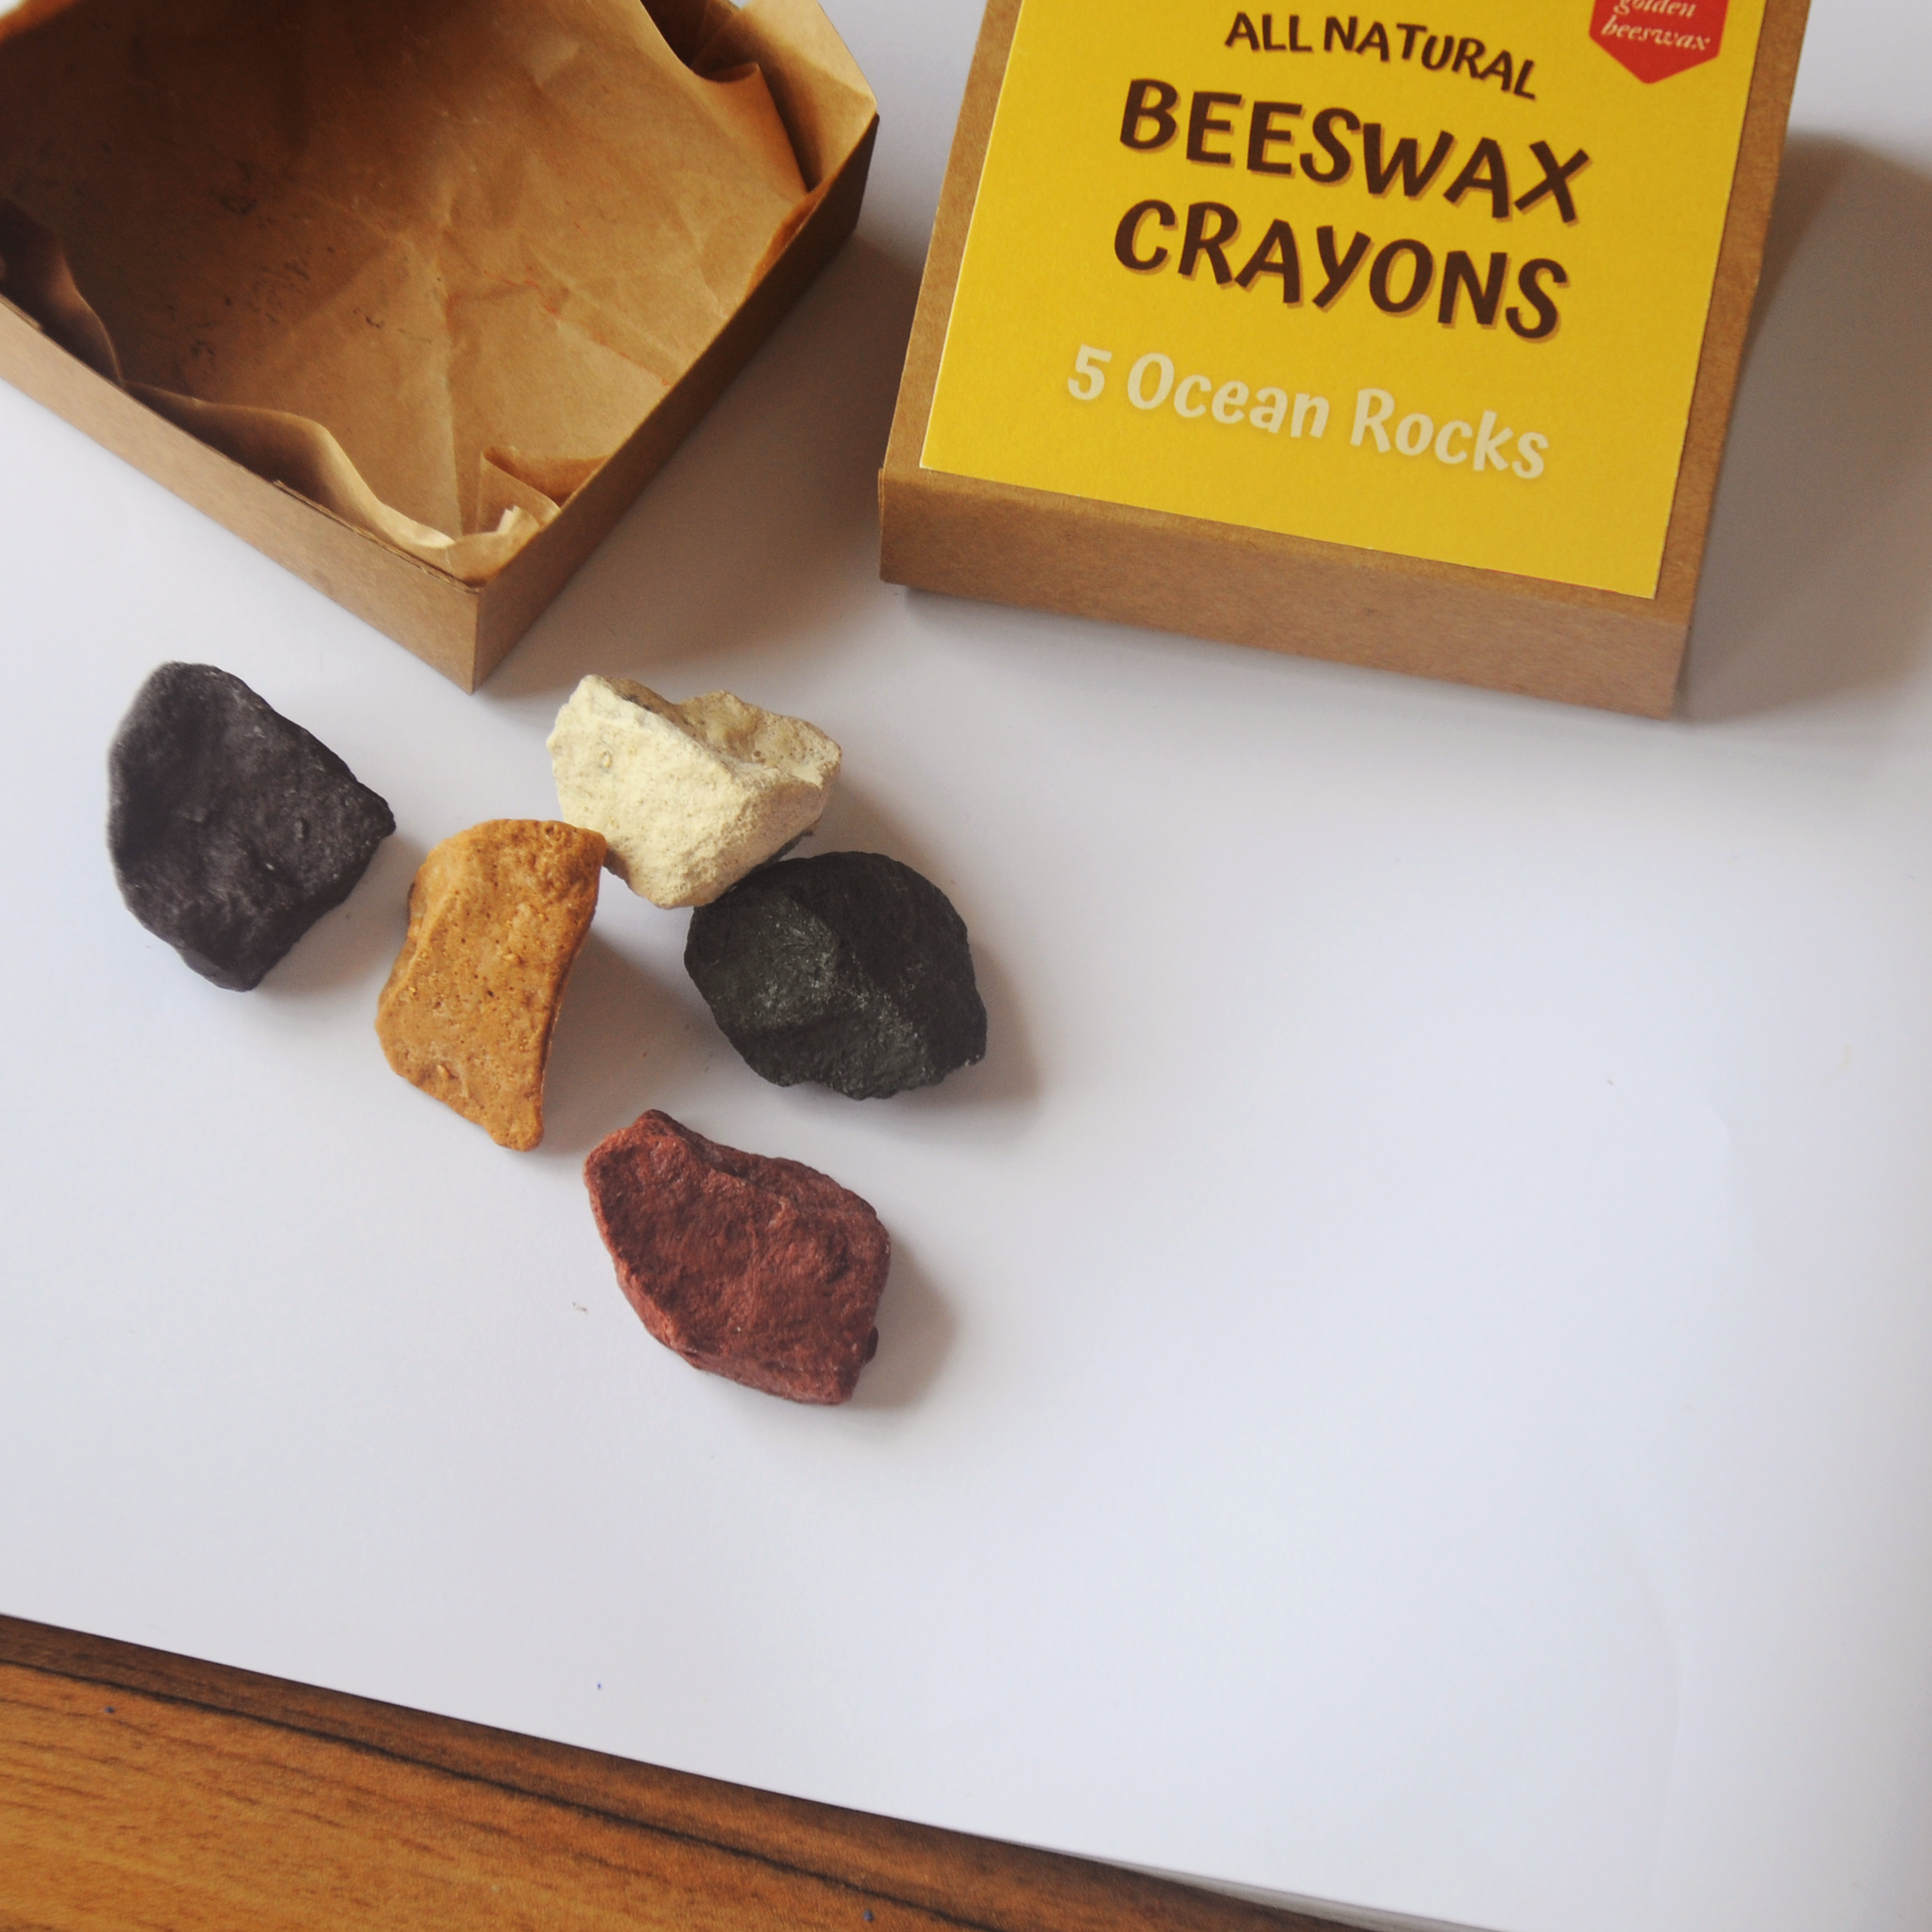 ALL NATURAL BEESWAX ROCK CRAYONS with crayons outside the box